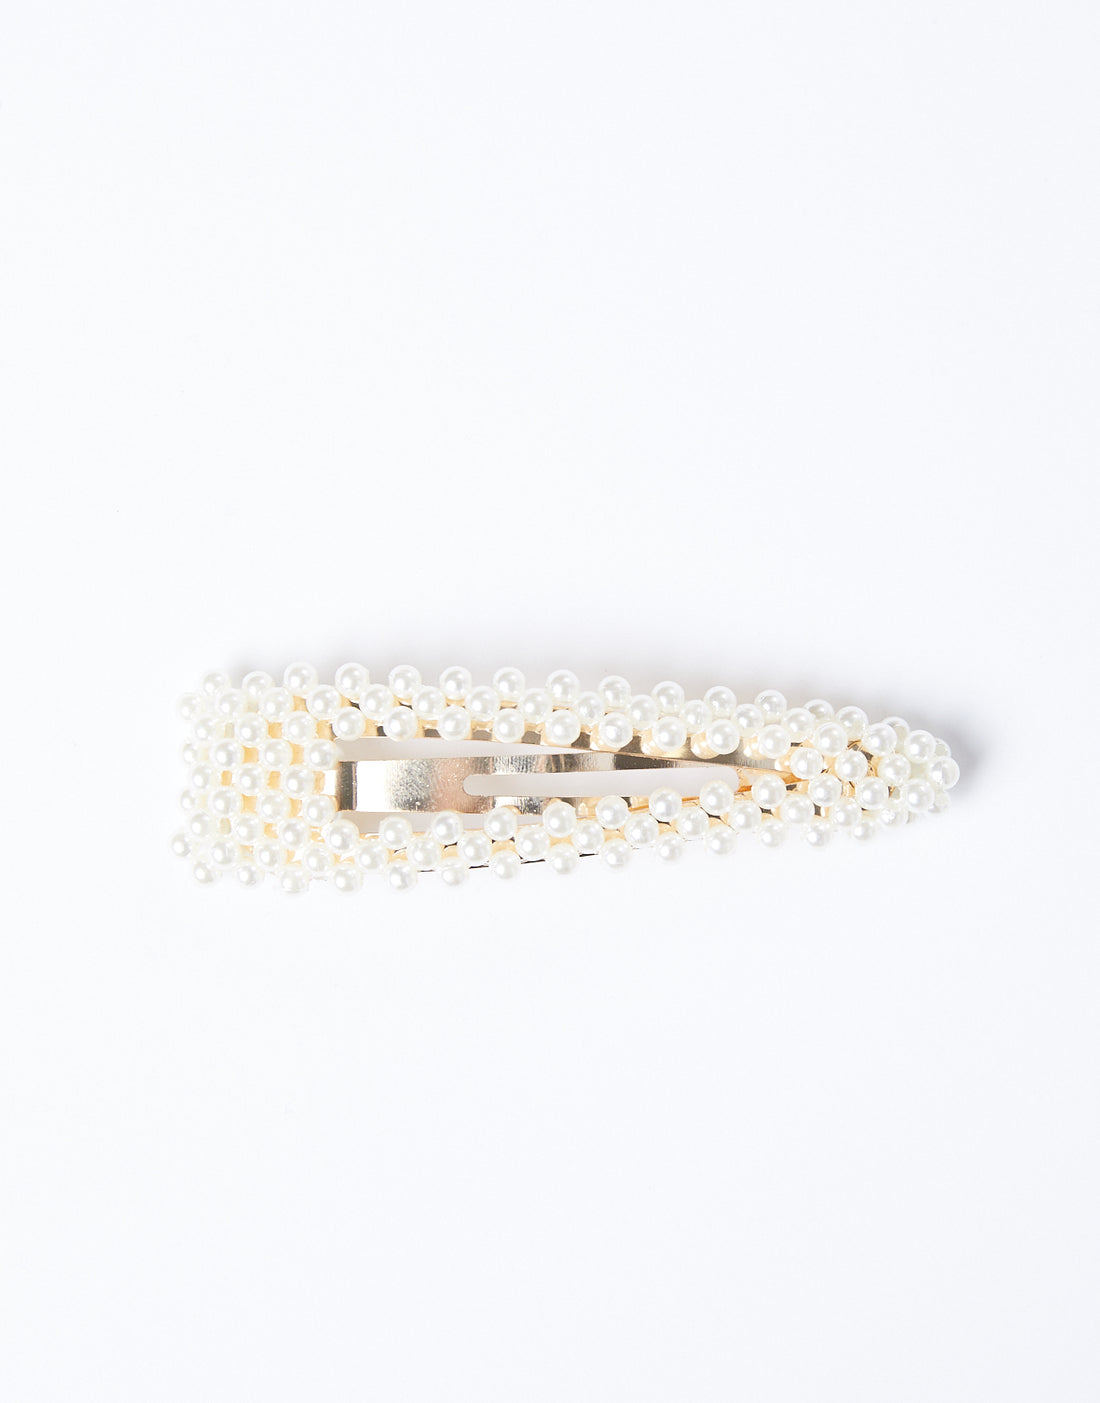 Golden Pearls Barrette Accessories Pearl One Size -2020AVE